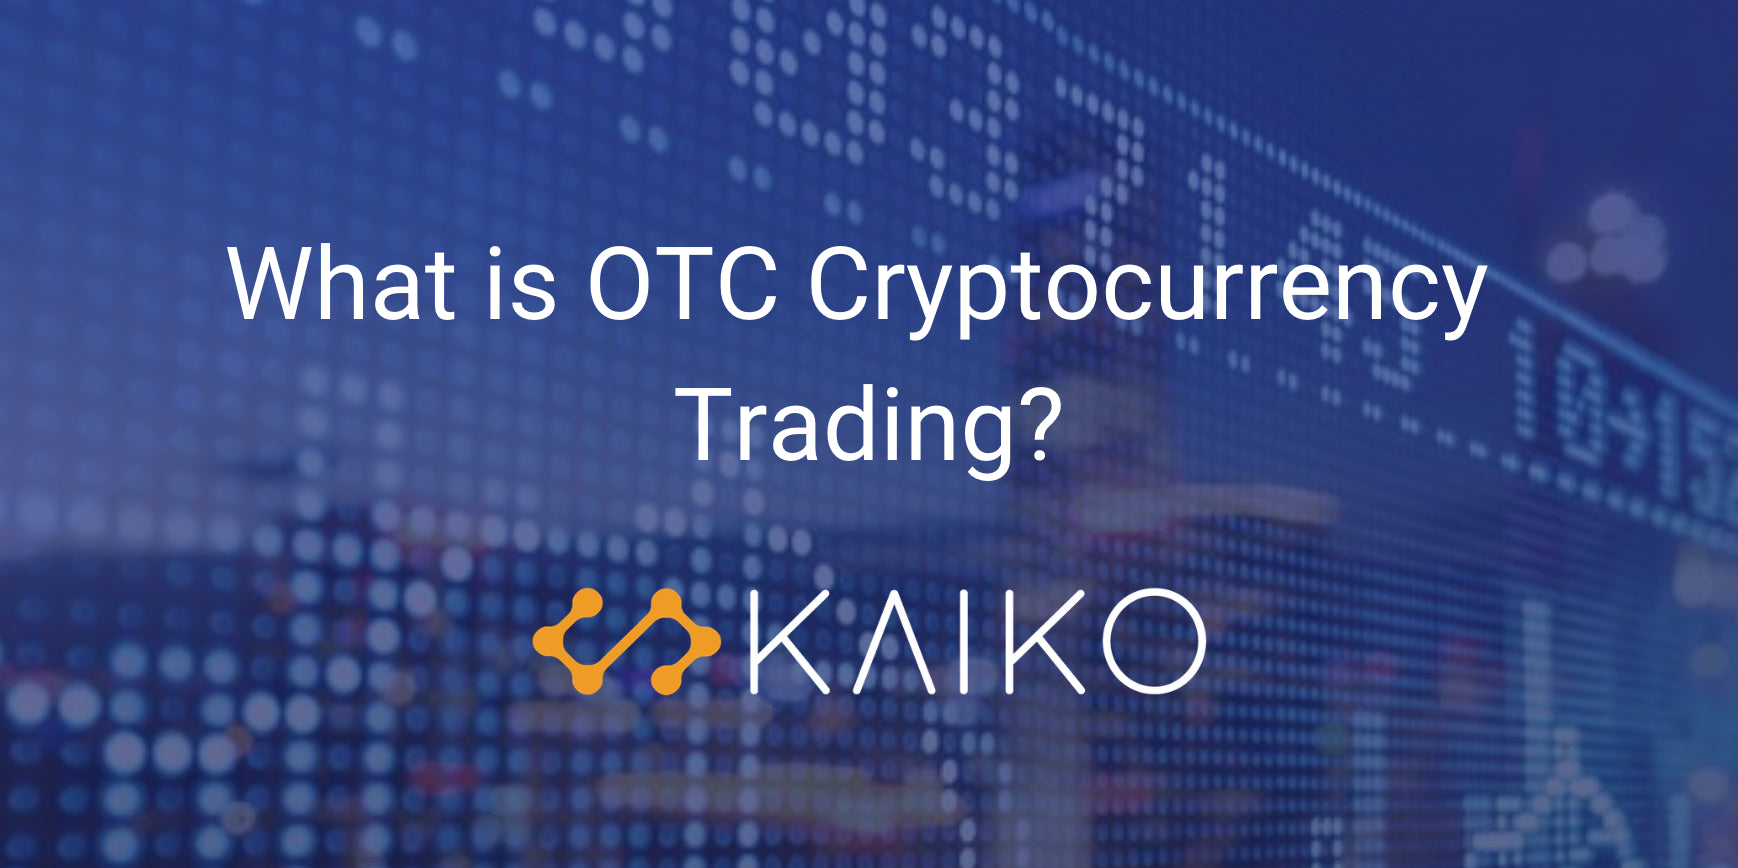 What is OTC cryptocurrency trading? - Kaiko Data